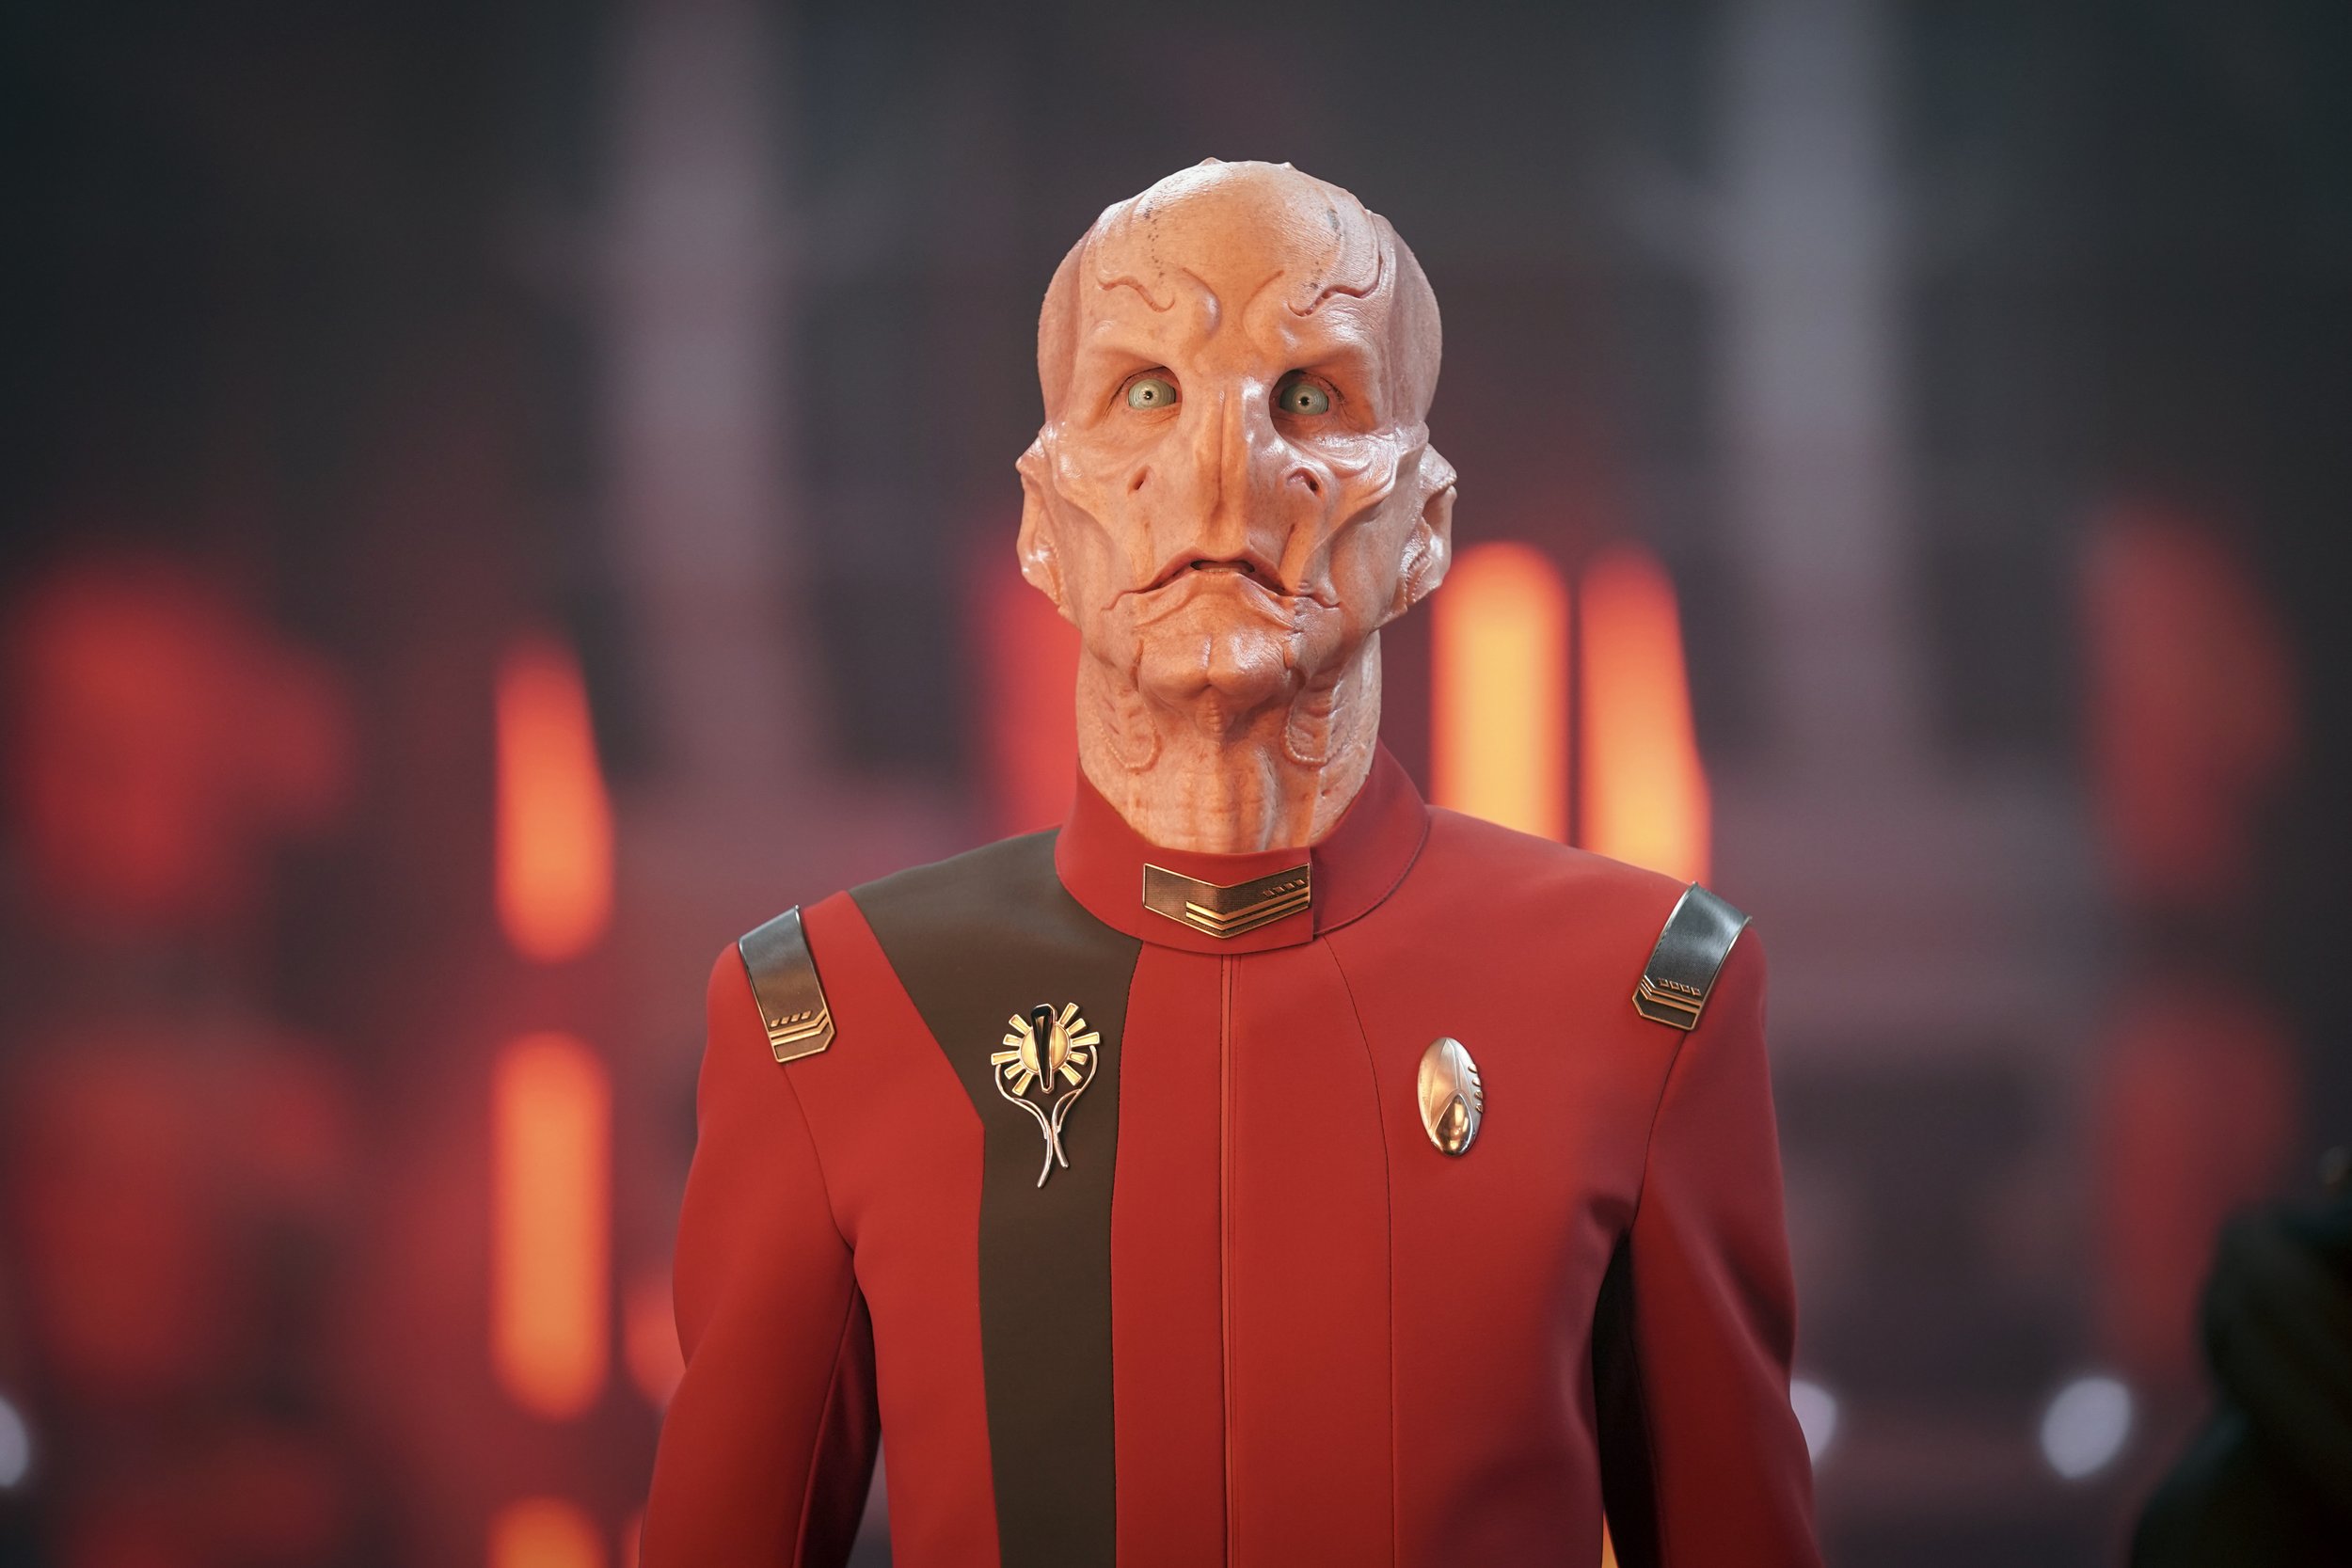   Pictured: Doug Jones as Saru of the Paramount+ original series STAR TREK: DISCOVERY. Photo Cr: Marni Grossman/Paramount+ © 2021 CBS Interactive. All Rights Reserved.  